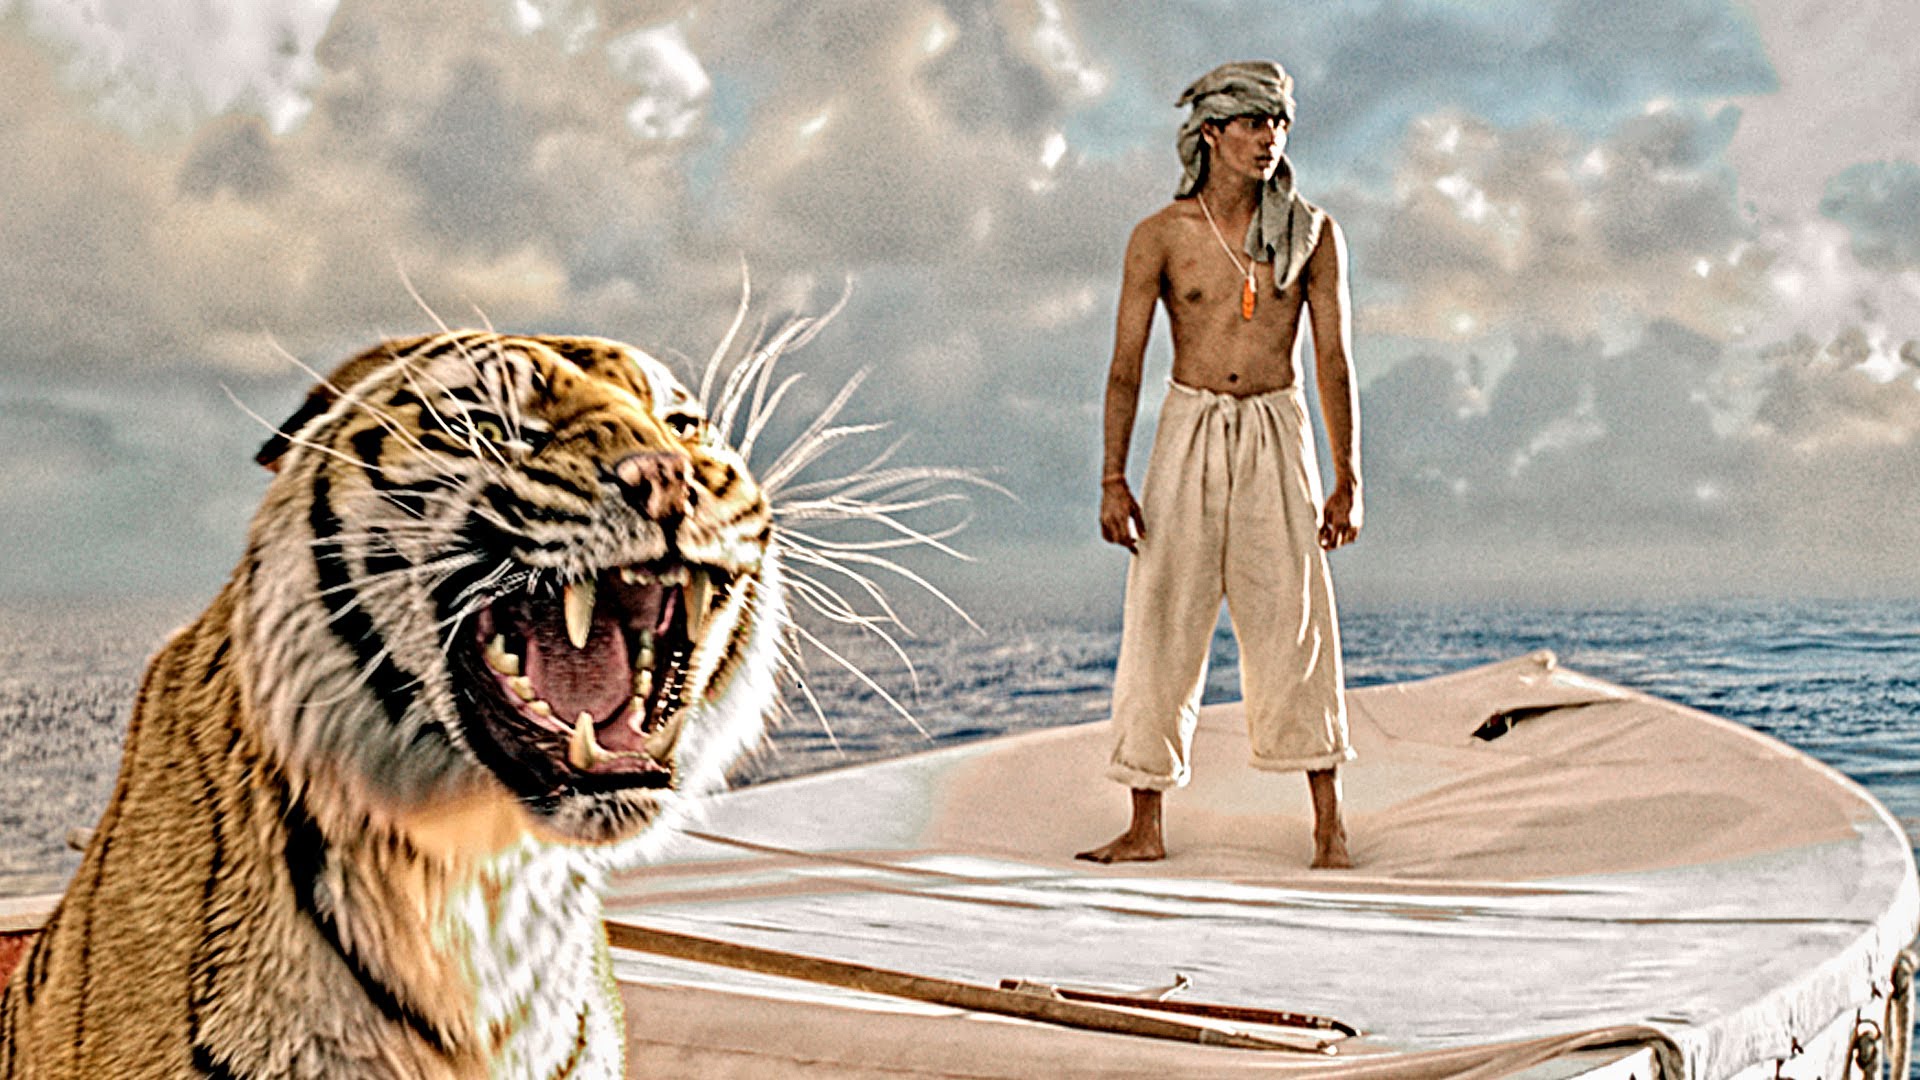 High Resolution Wallpaper | Life Of Pi 1920x1080 px